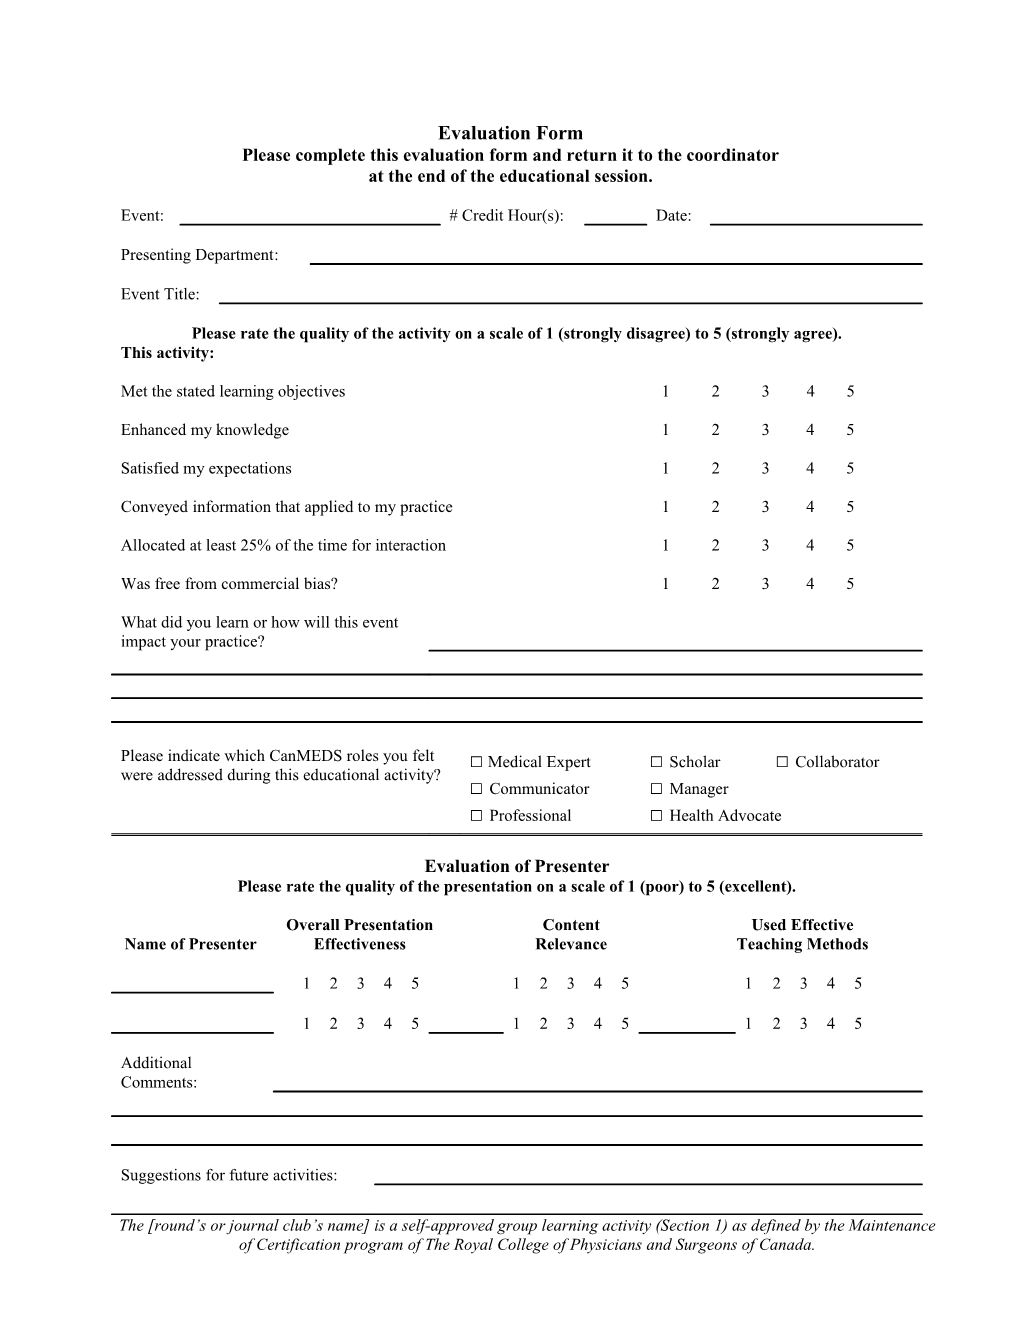 Please Complete This Evaluation Form and Return It to the Coordinator